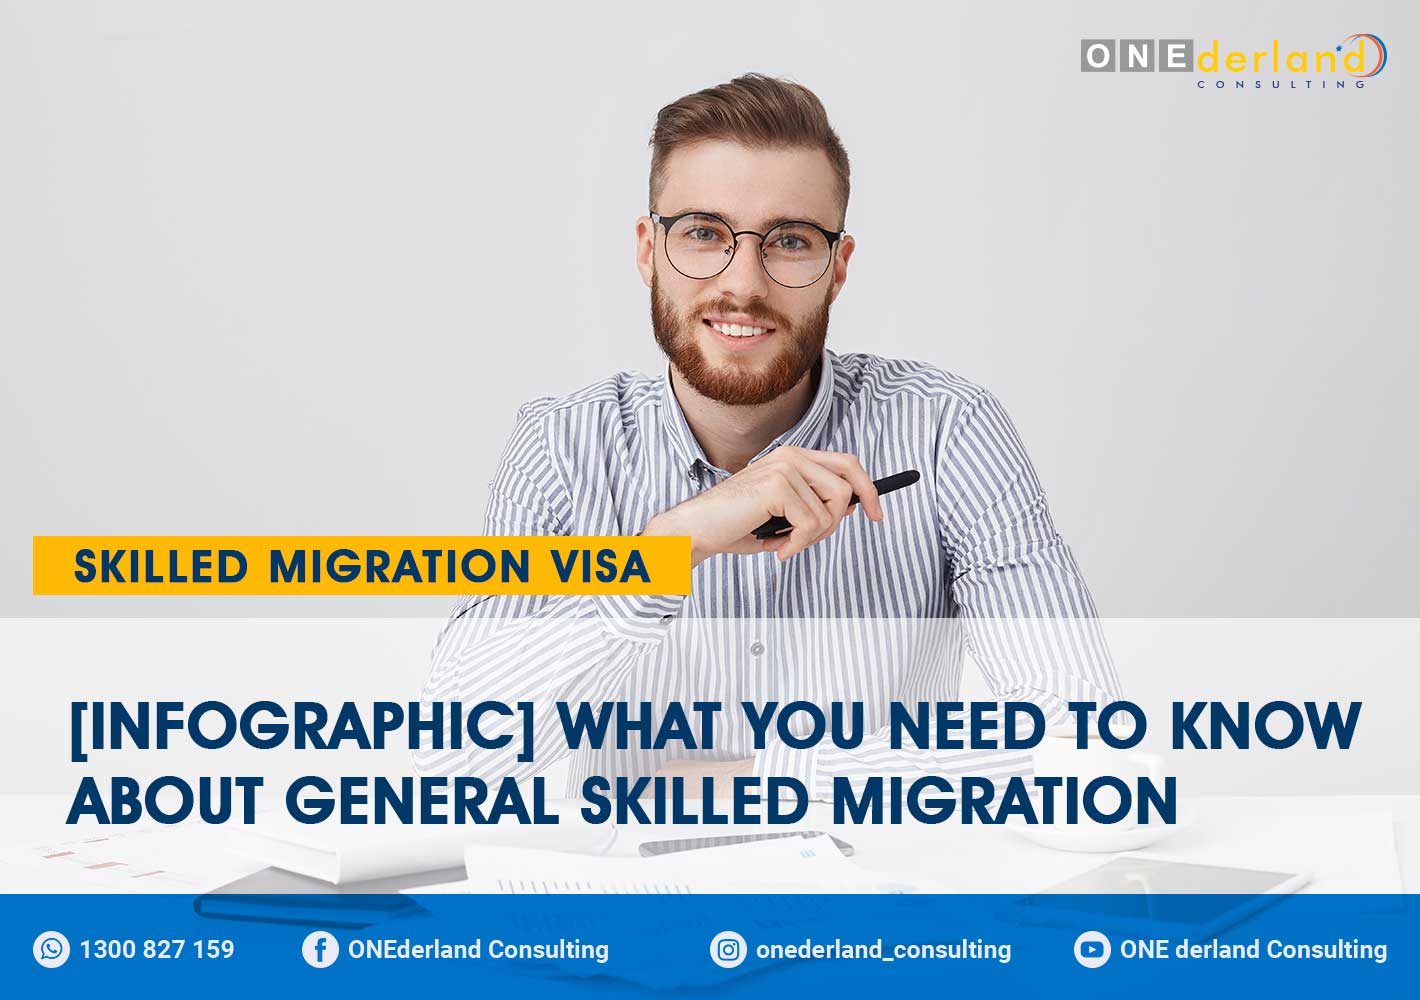 What You Need To Know About General Skilled Migration